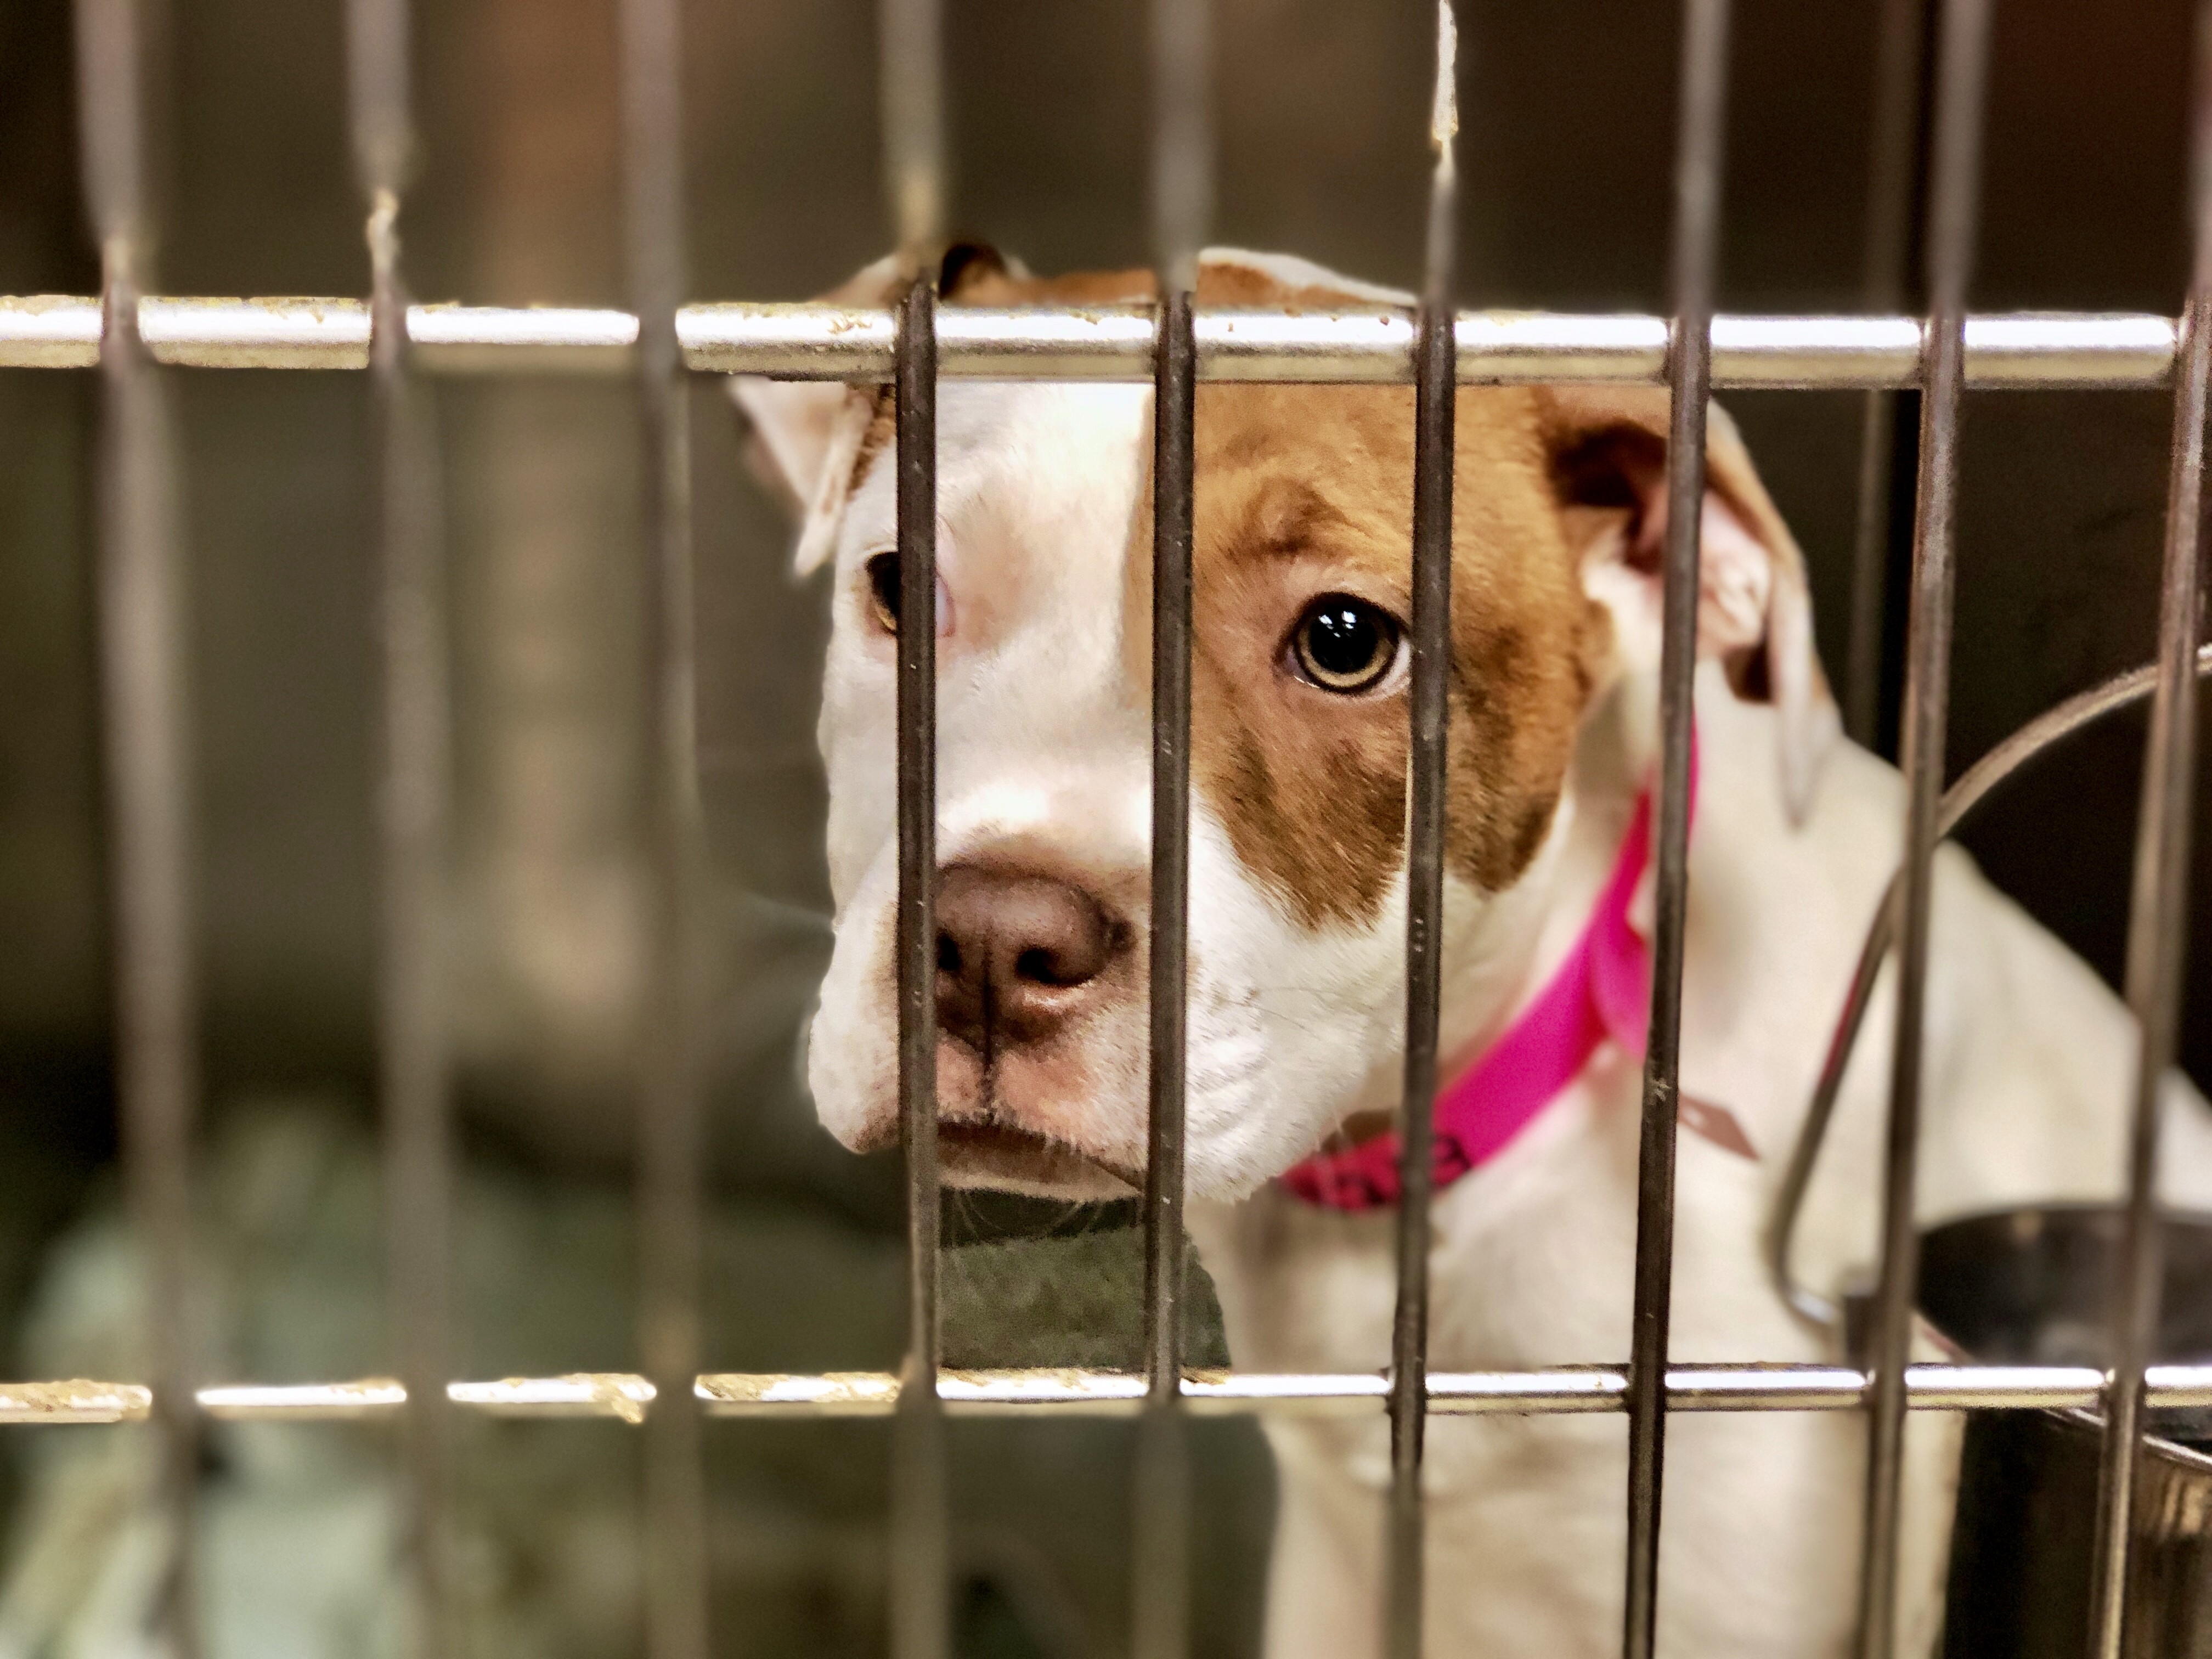 Dogs and cats at Detroit's animal shelter have no veterinarians, prompting  plea for help | Metro Detroit News | Detroit | Detroit Metro Times